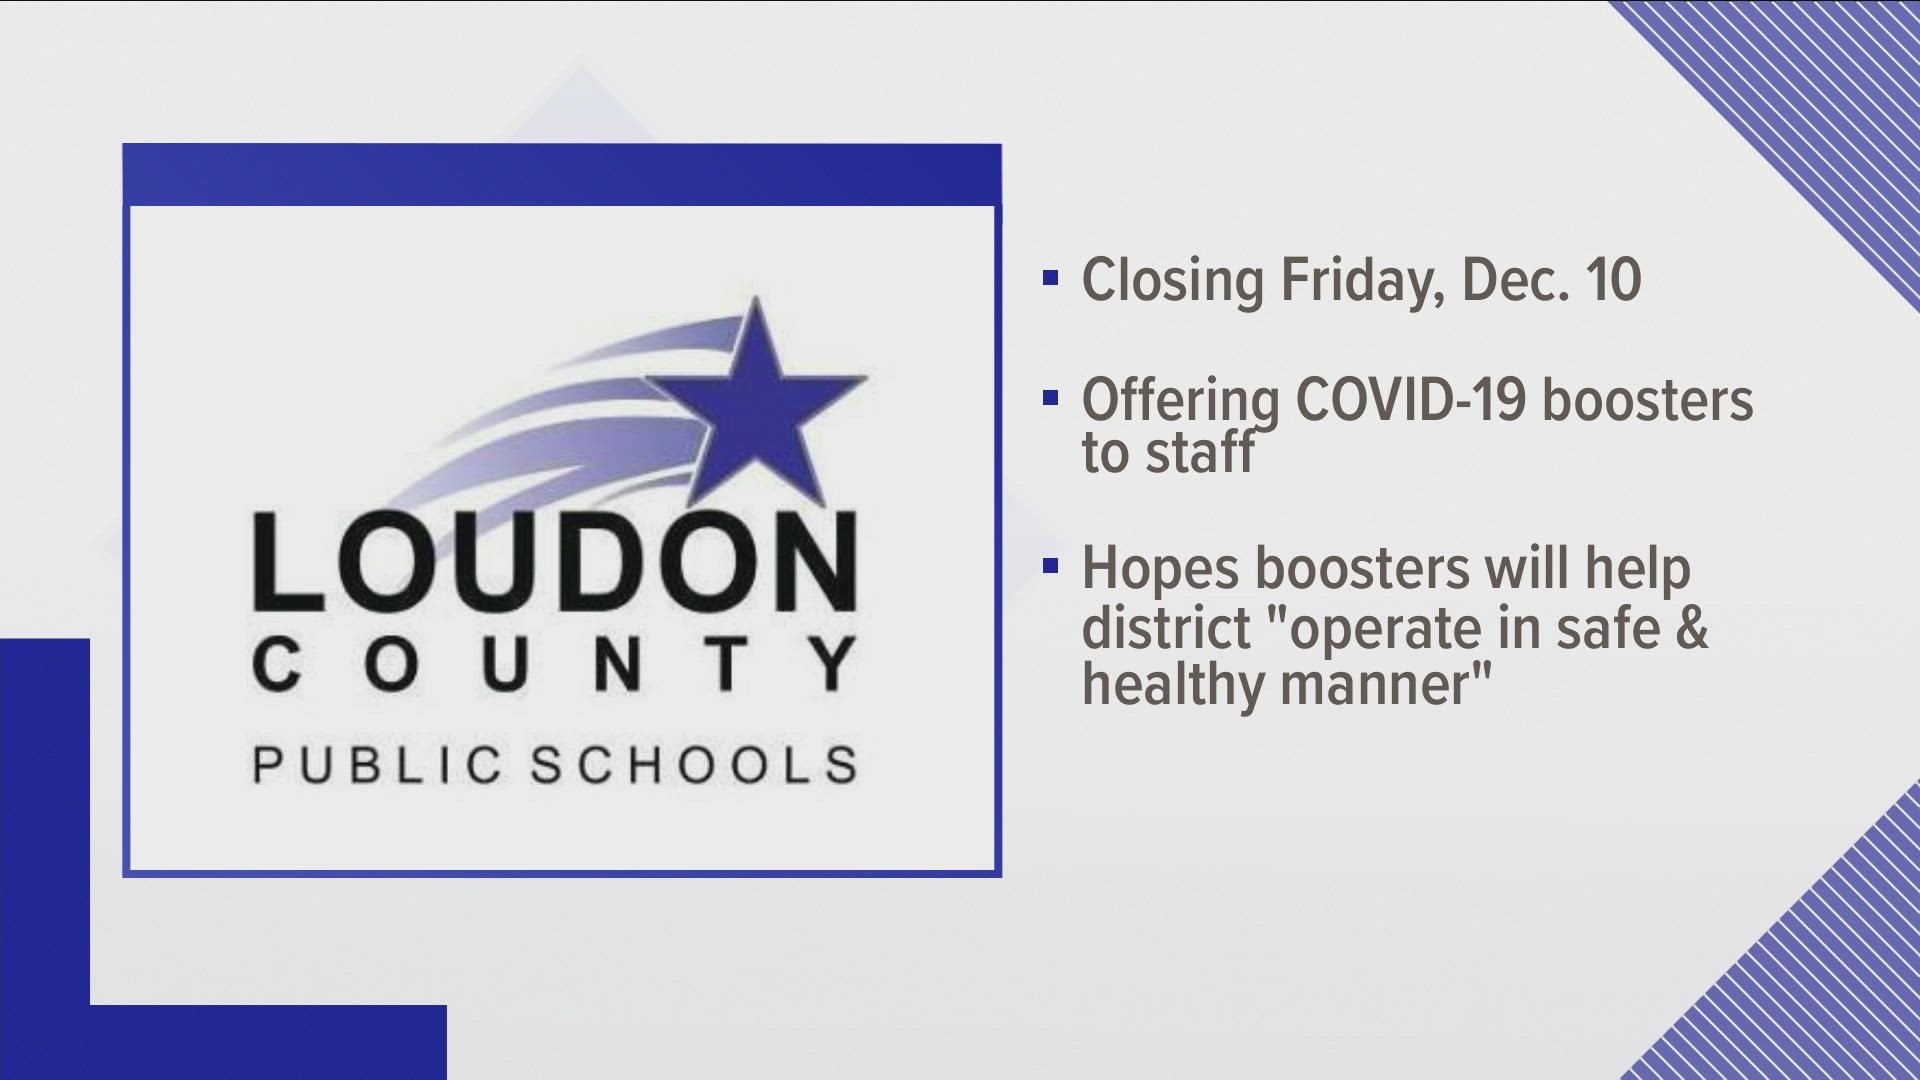 Loudon County Schools to close Dec. 10 to give COVID-19 booster shots for staff